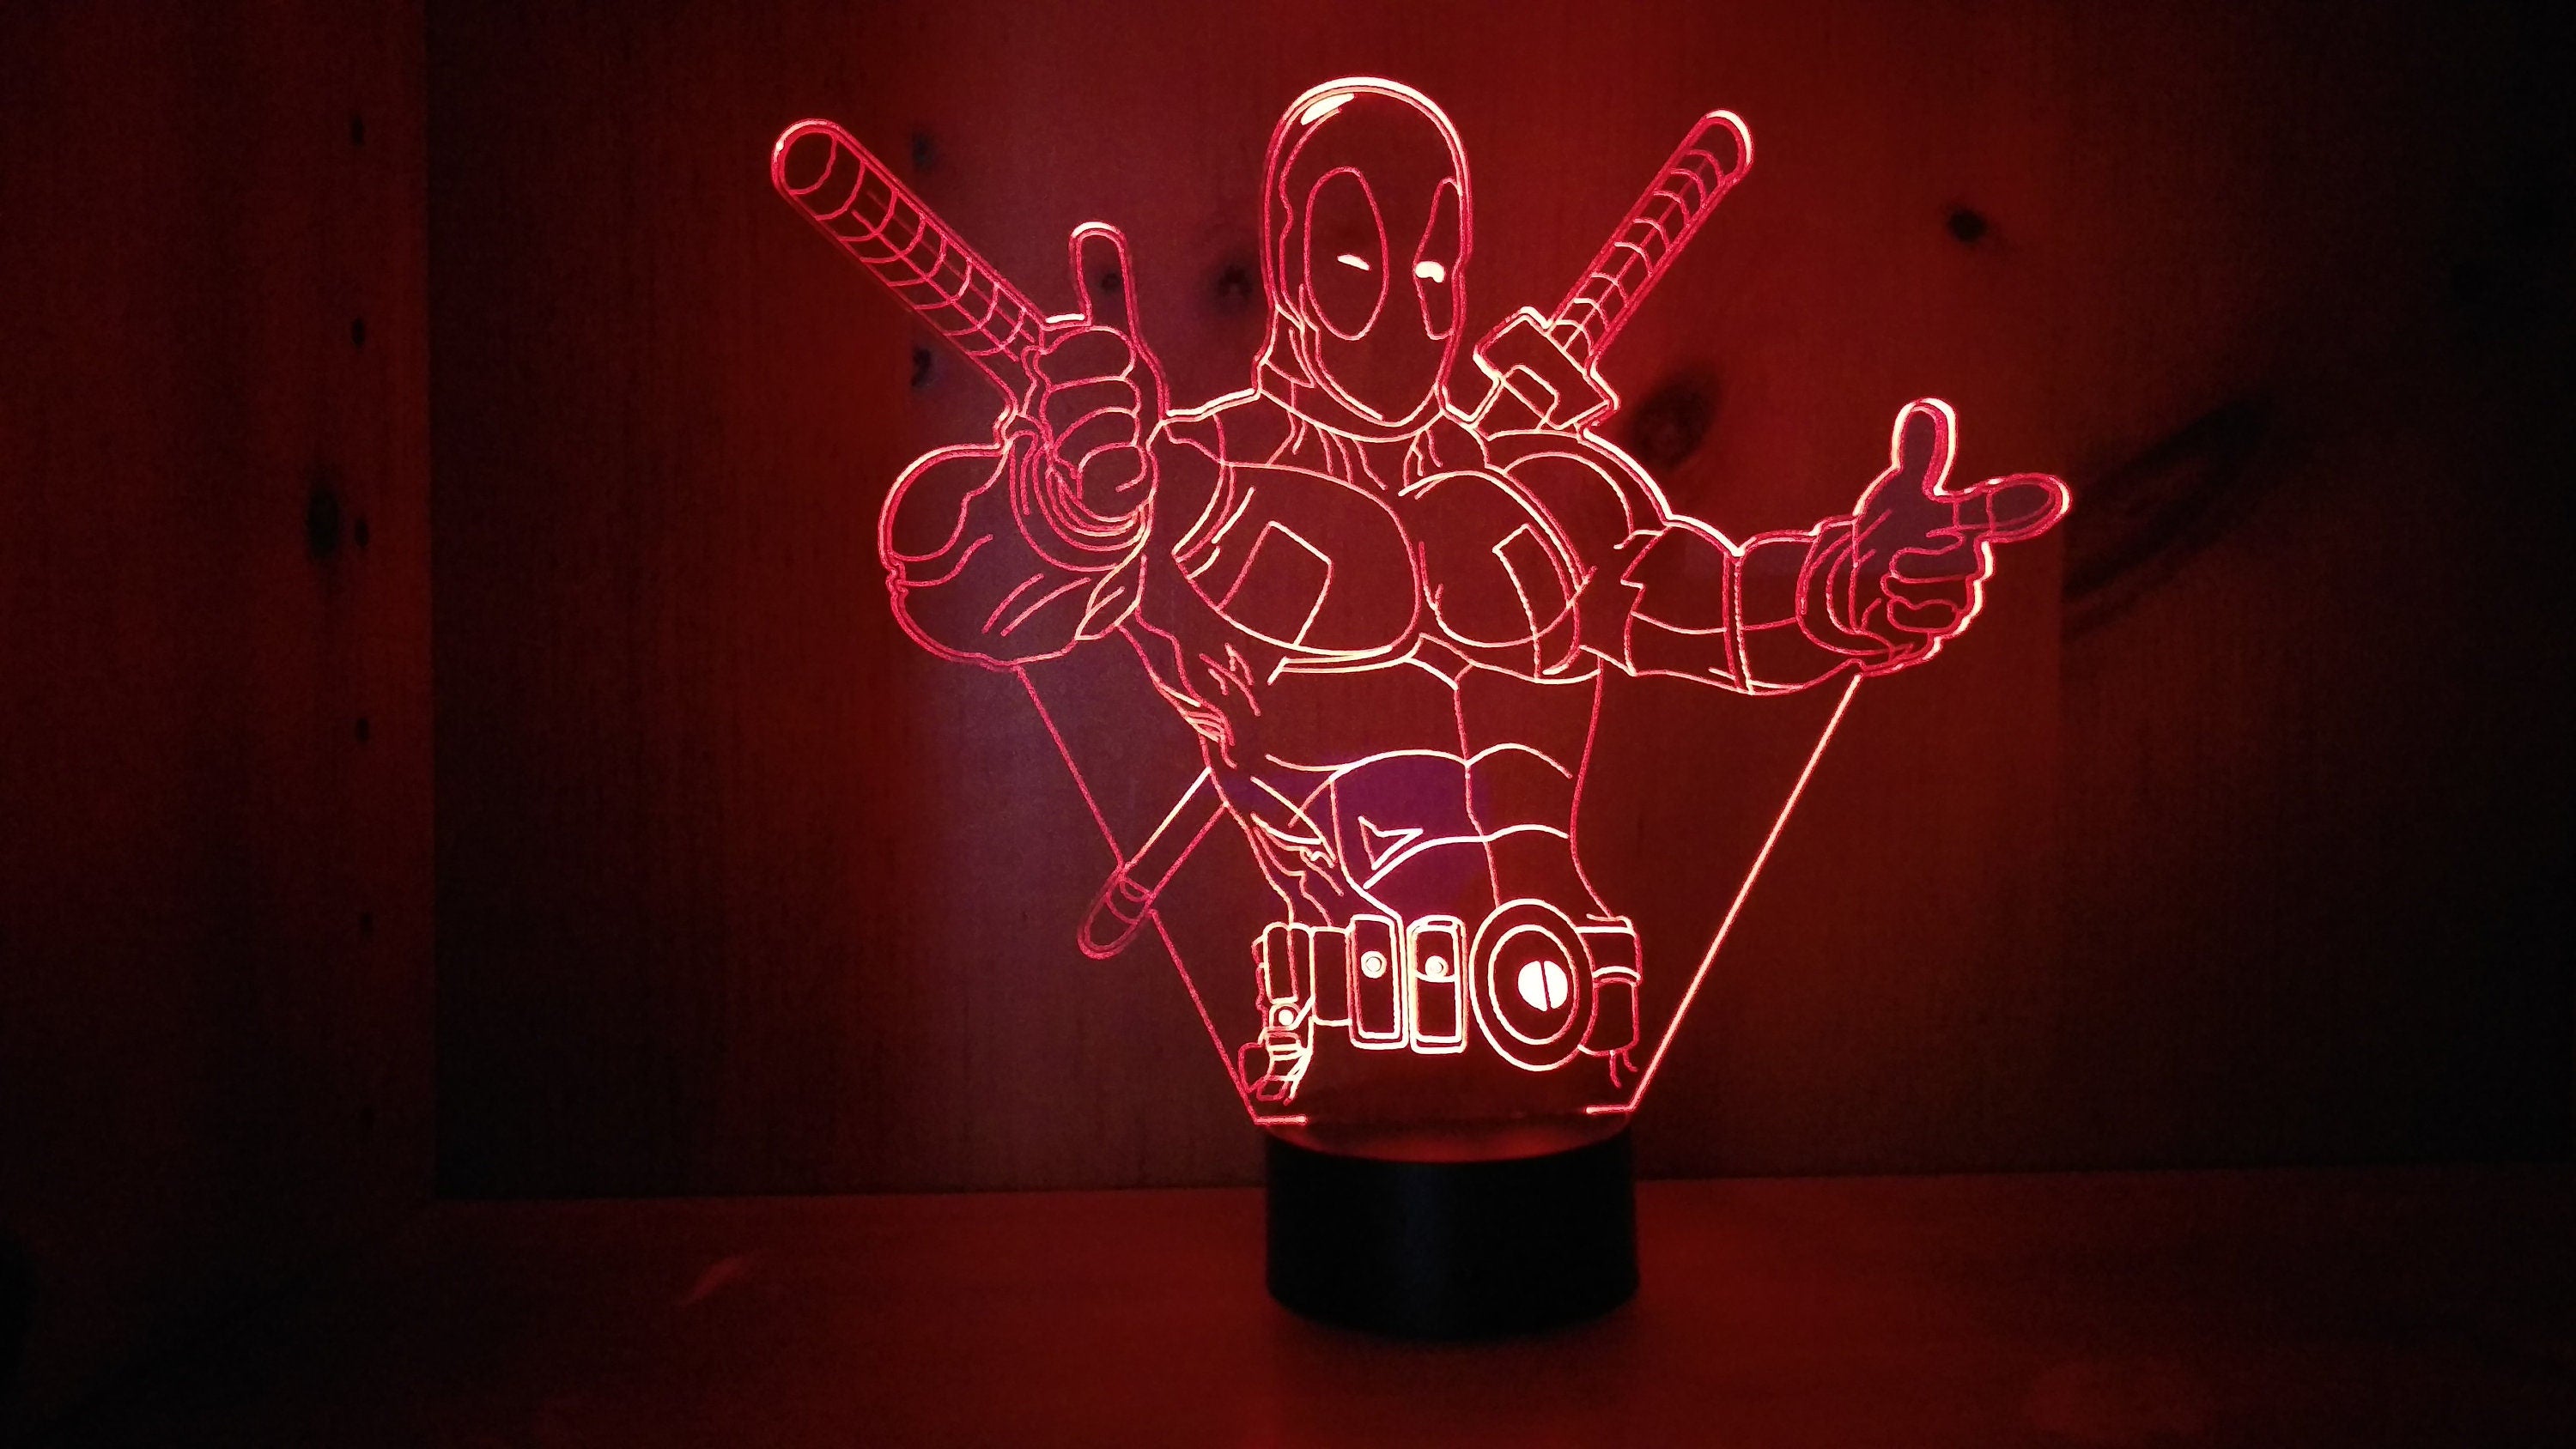 Awesome Deadpool 3D lamp (2177) - FREE SHIPPING!